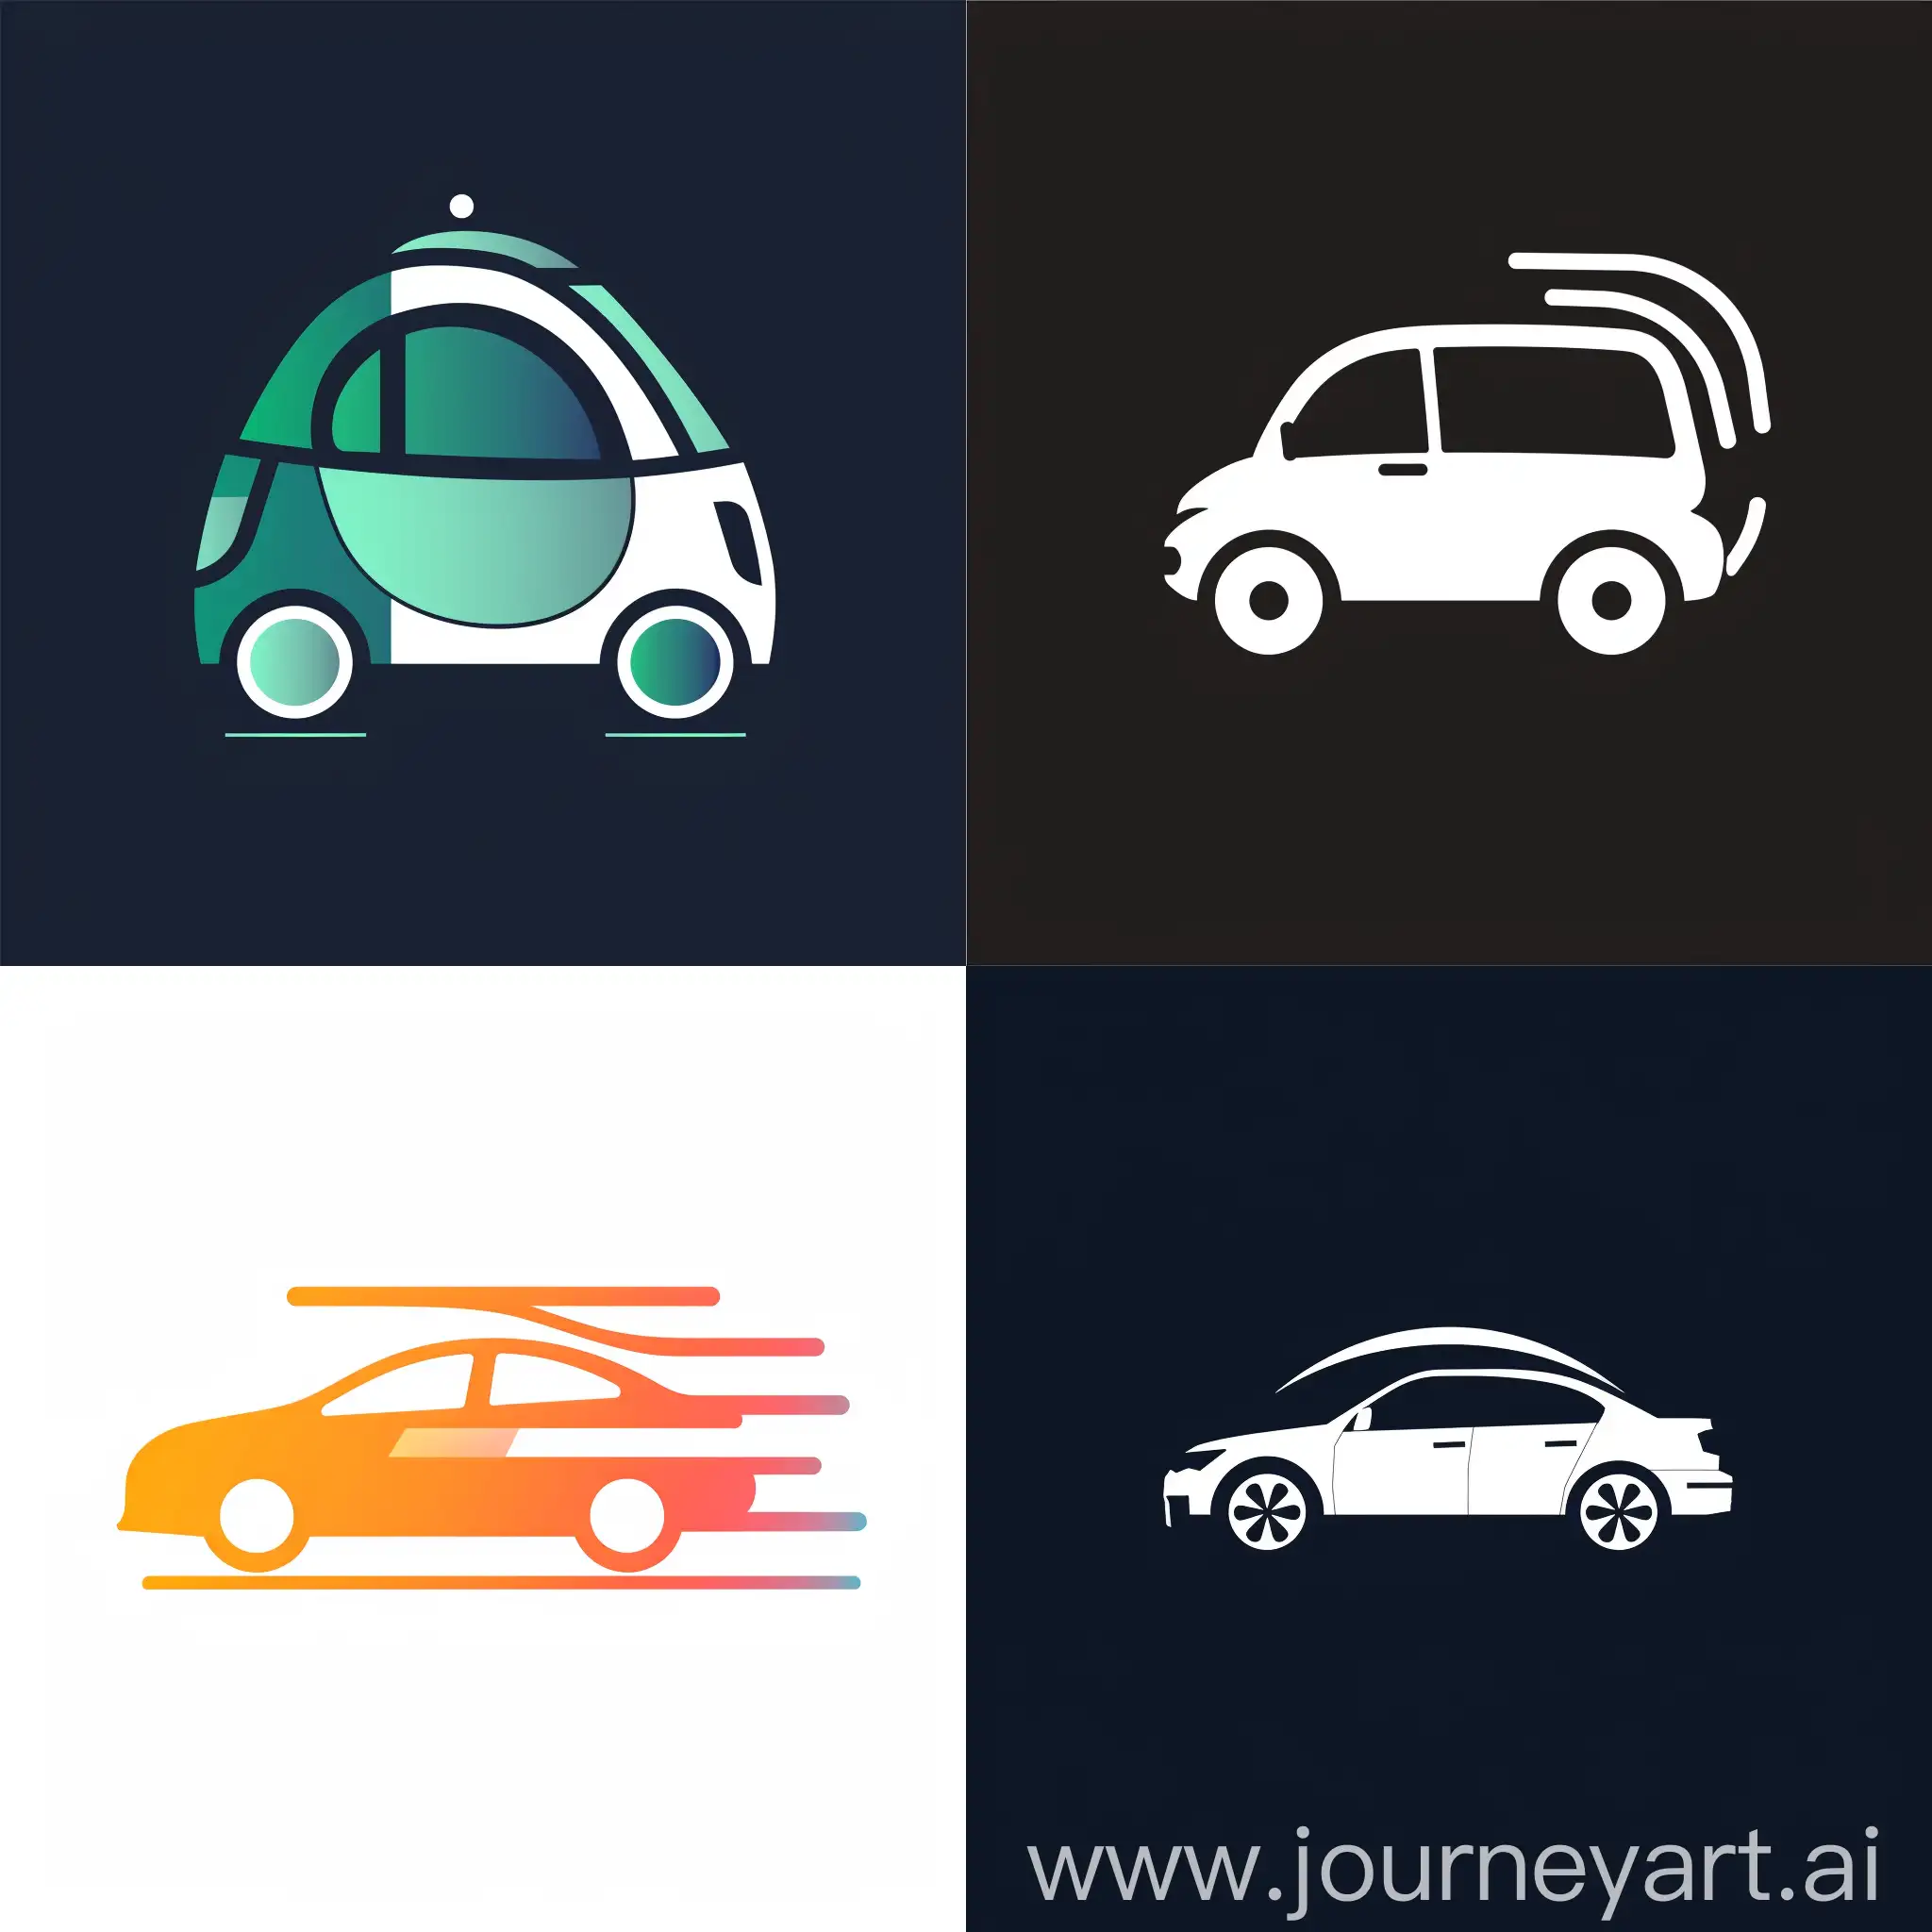 generate a company logo for a cool company, that offers mobility from cars to other forms of transportation and services